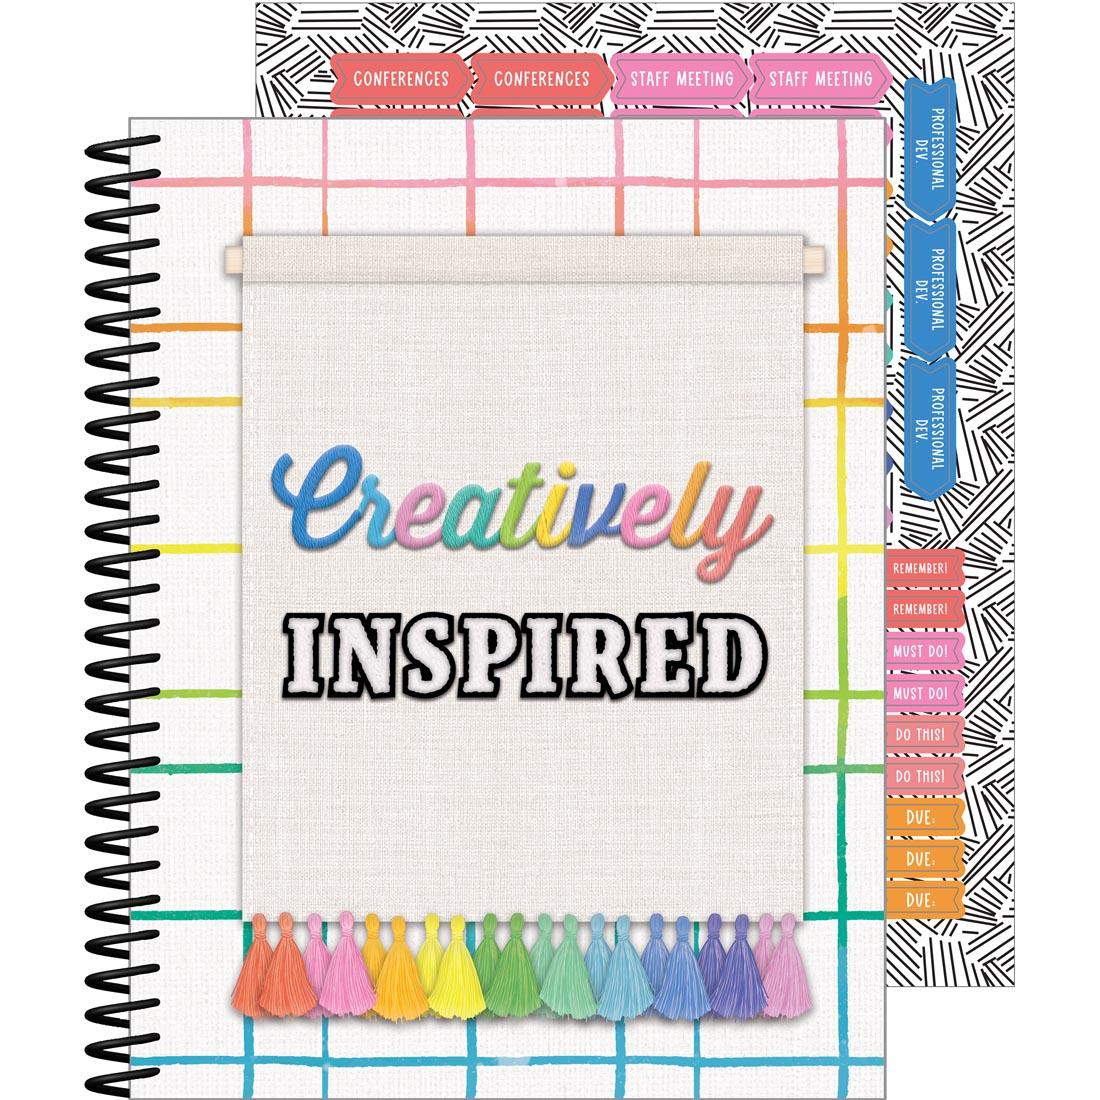 front cover and sheet of stickers from the Teacher Planner from the Creatively Inspired Collection By Carson Dellosa